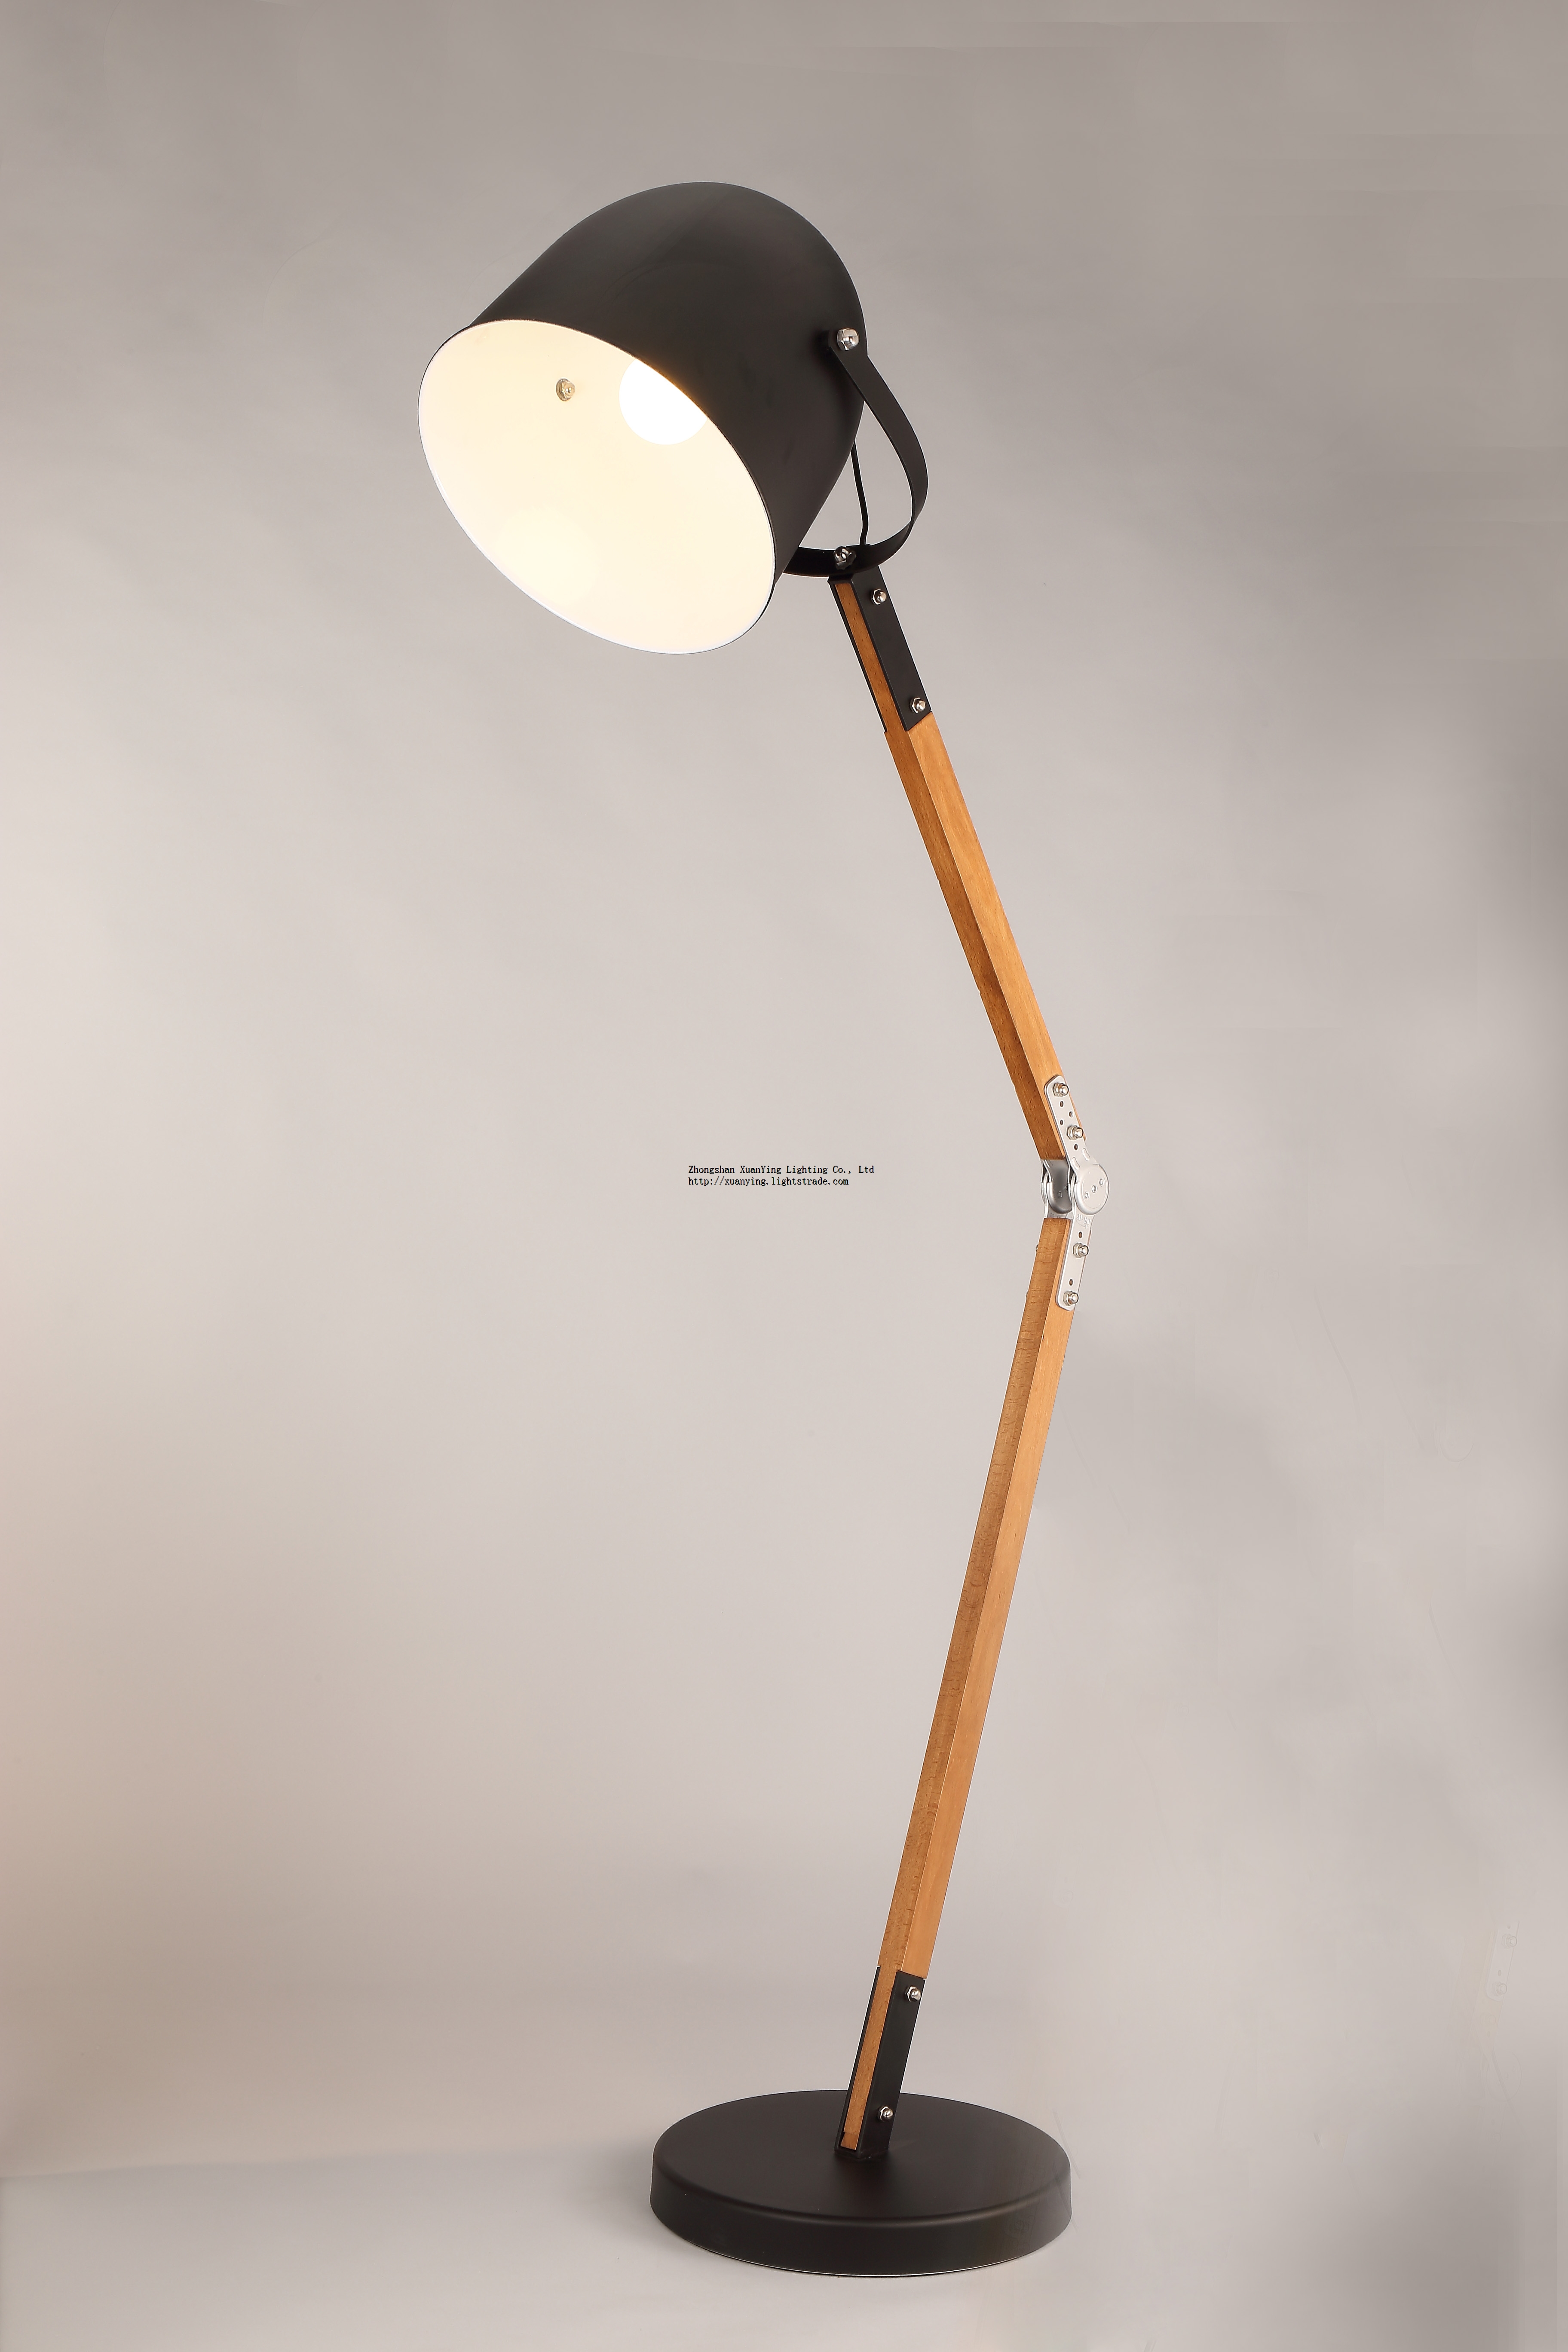 European style high quality floor lamp for distributors